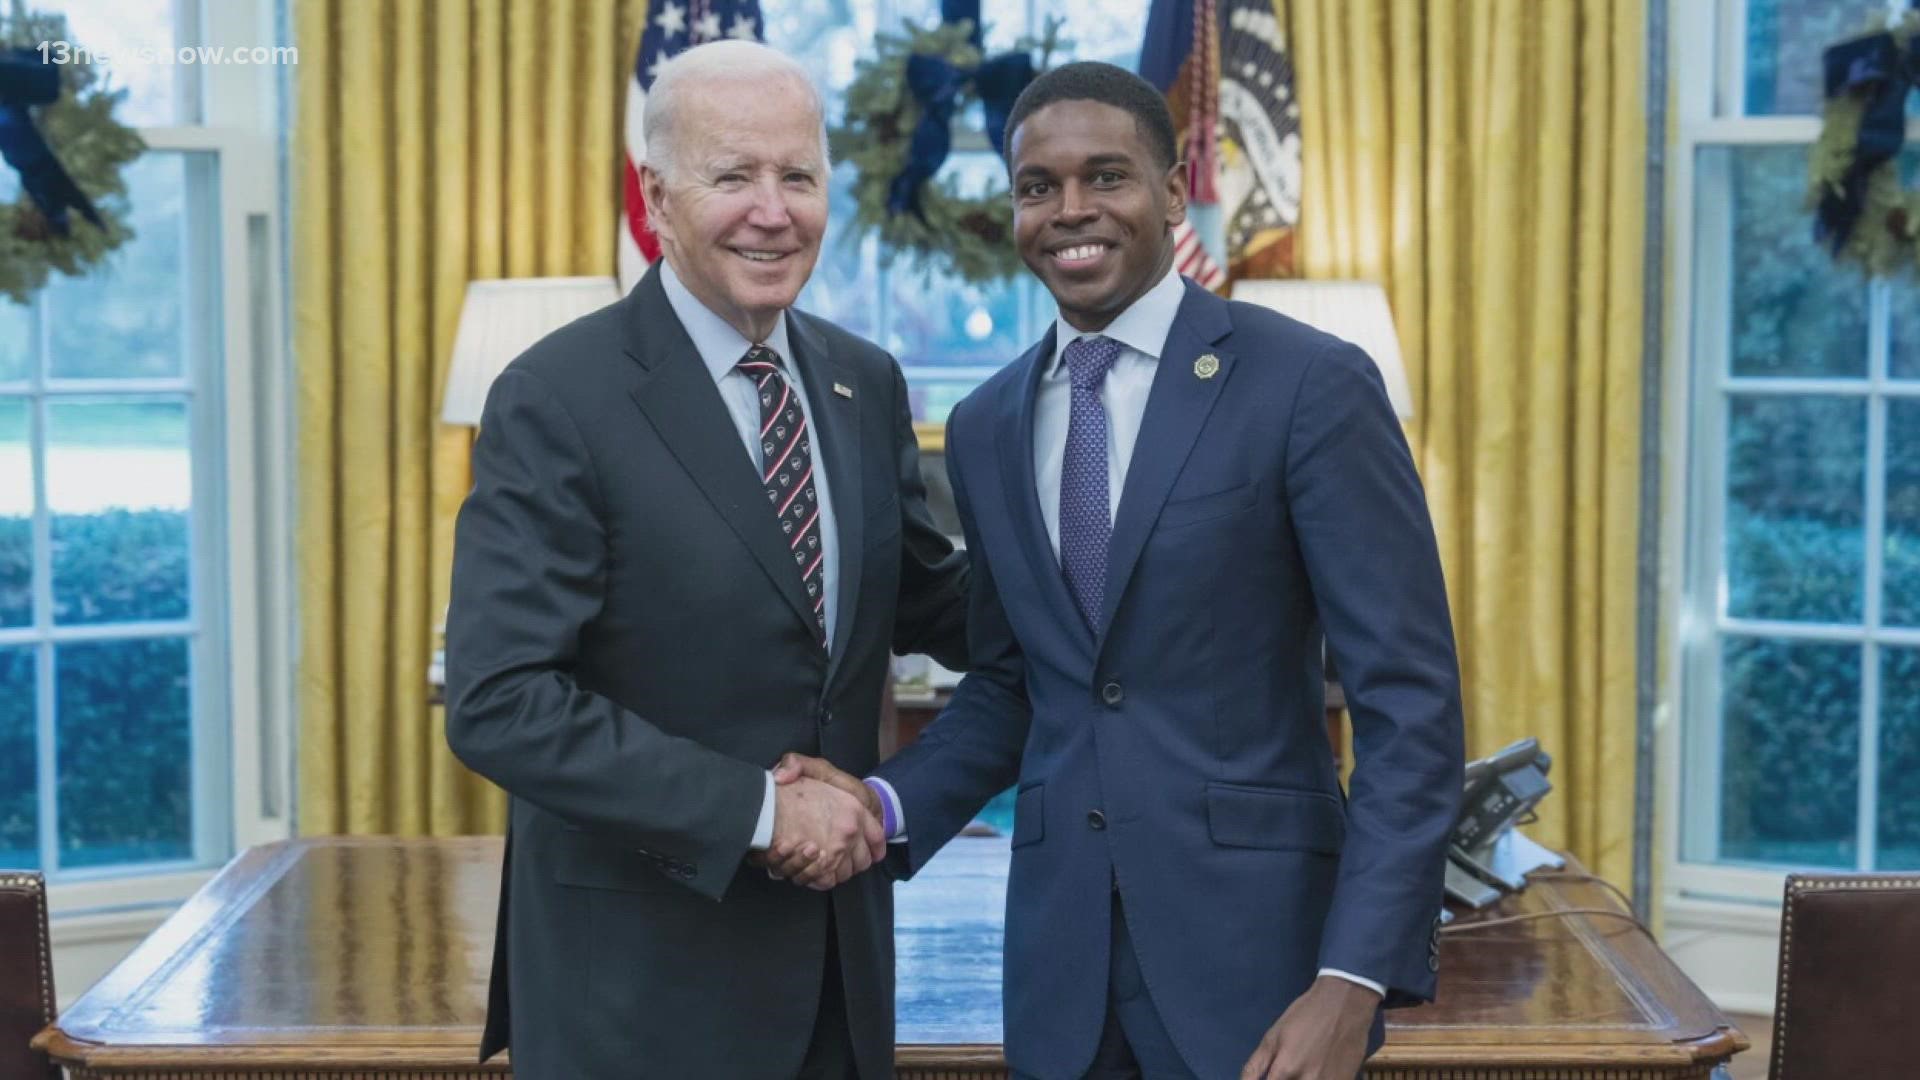 Newport News Mayor Phillip Jones visited the nation's capital today to meet with President Biden and White House leaders.